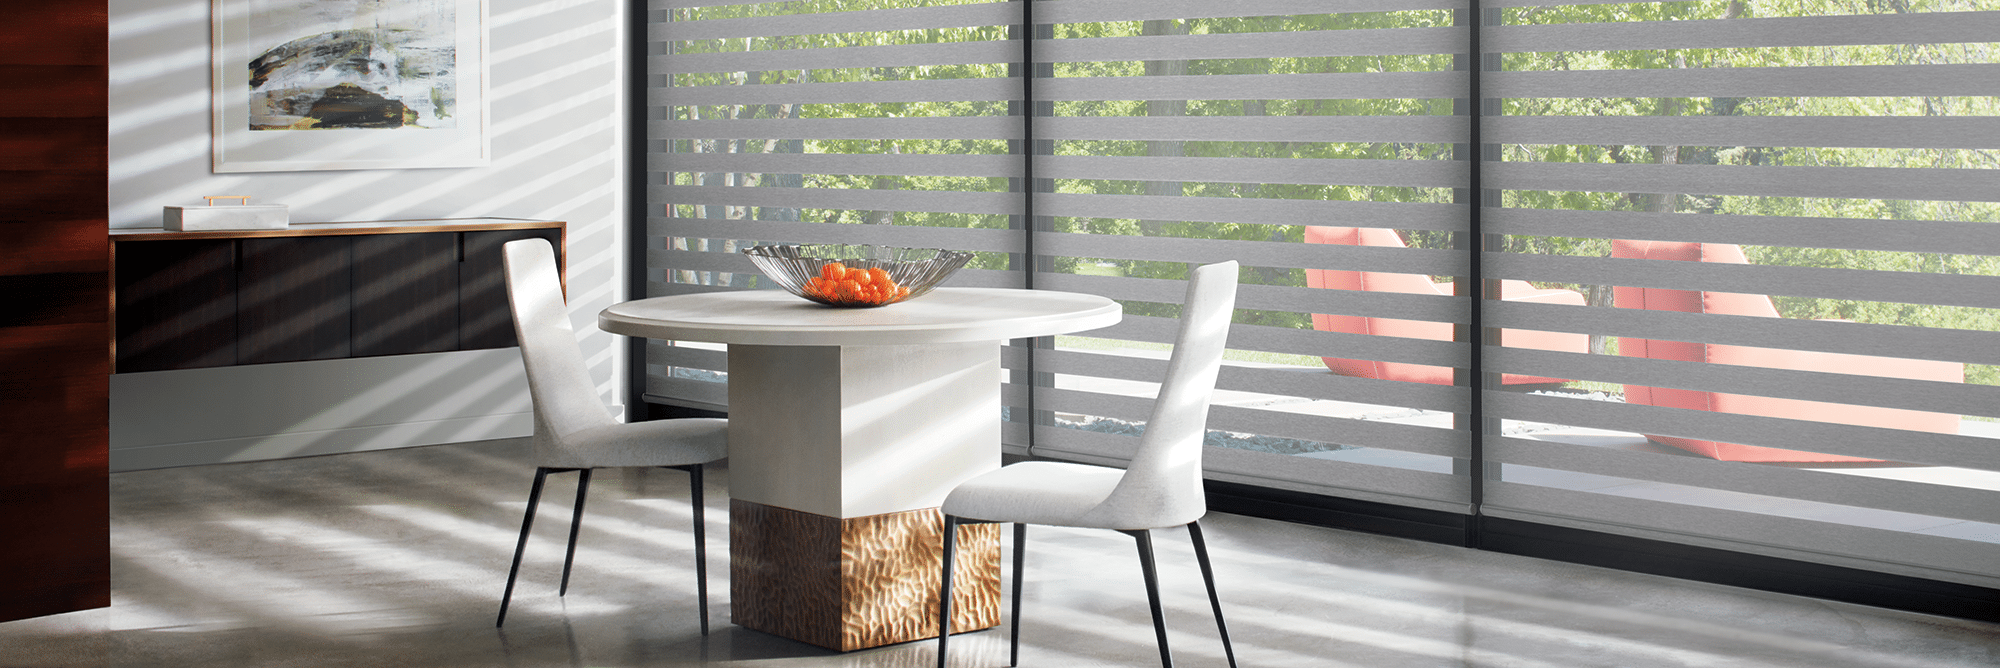 fort collins window coverings from hunter douglas in bright dining area